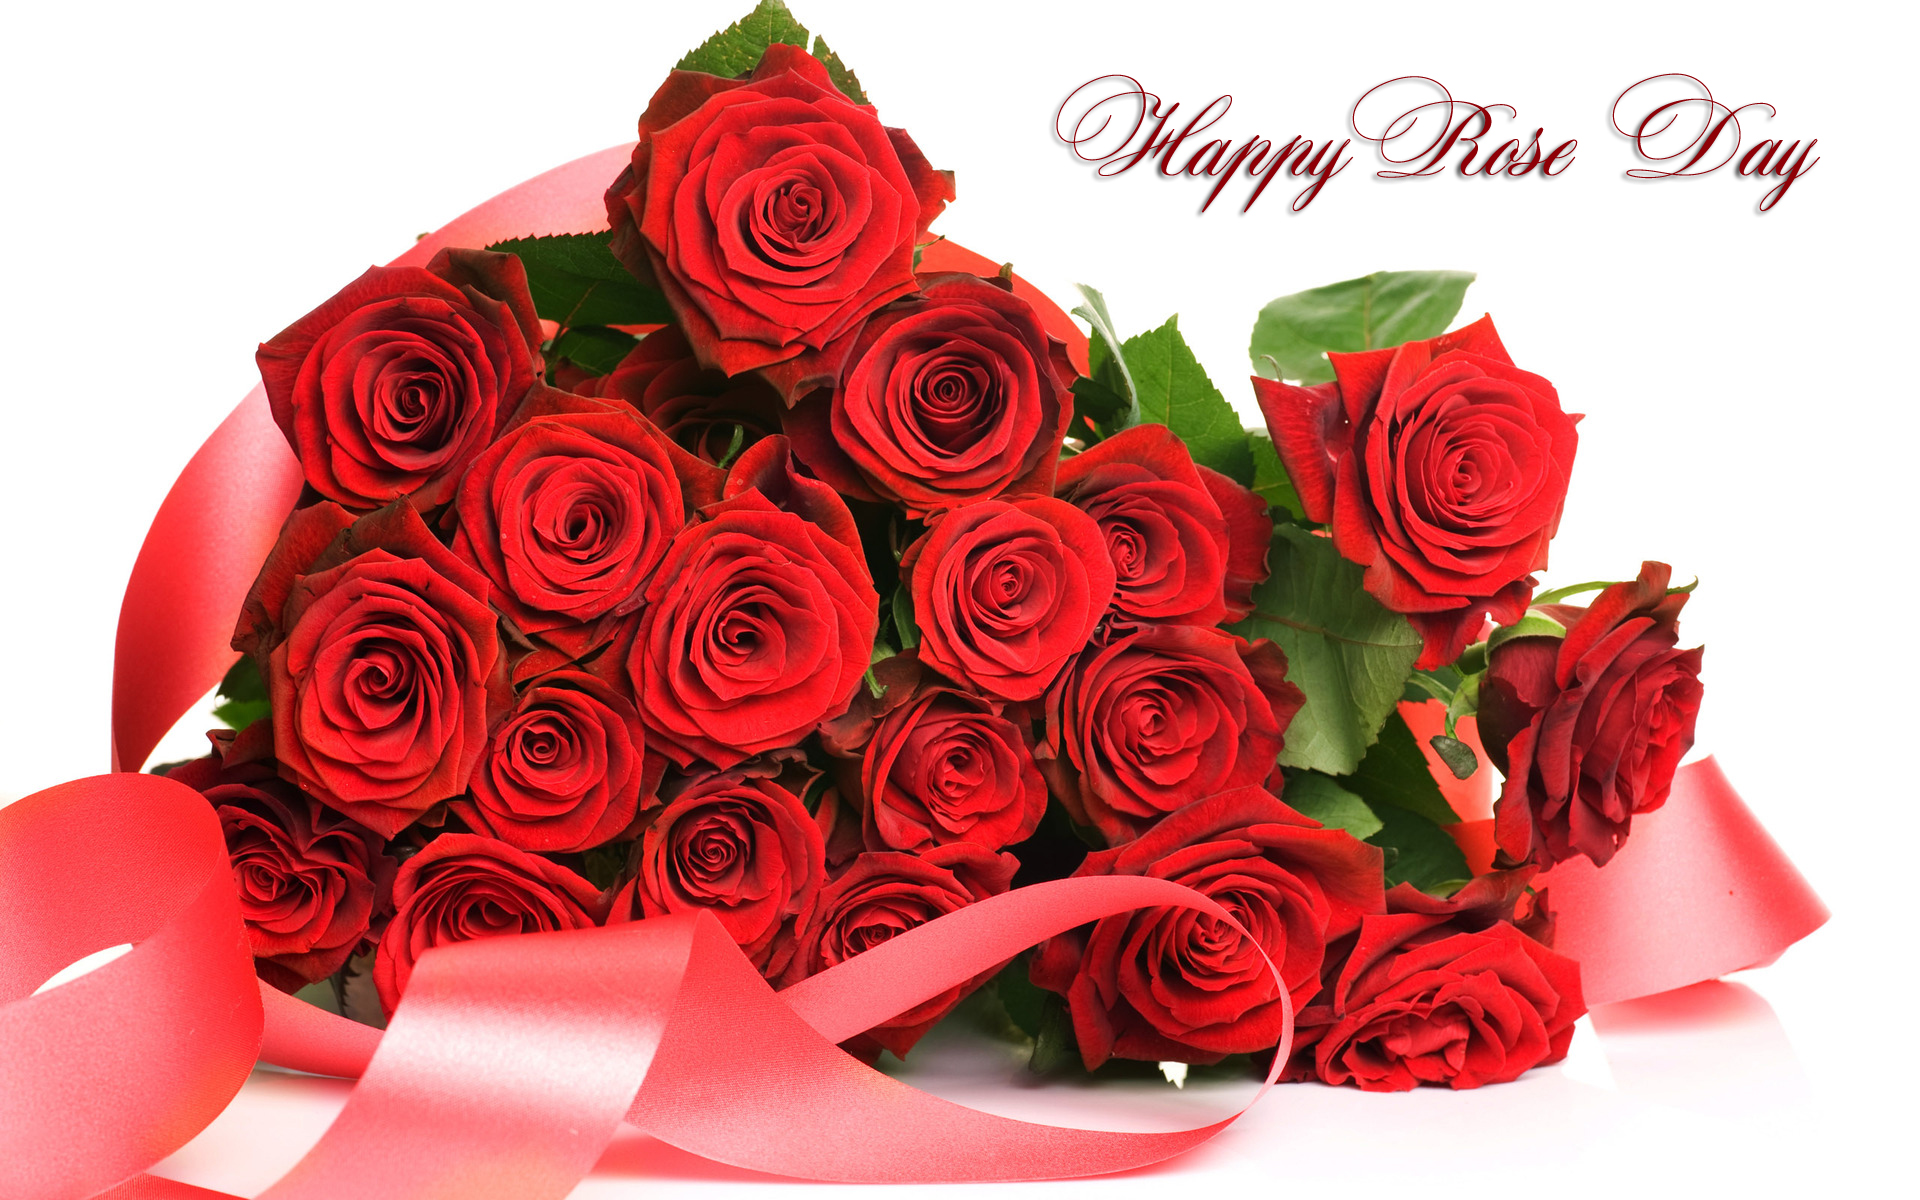 Rose Day HD Images